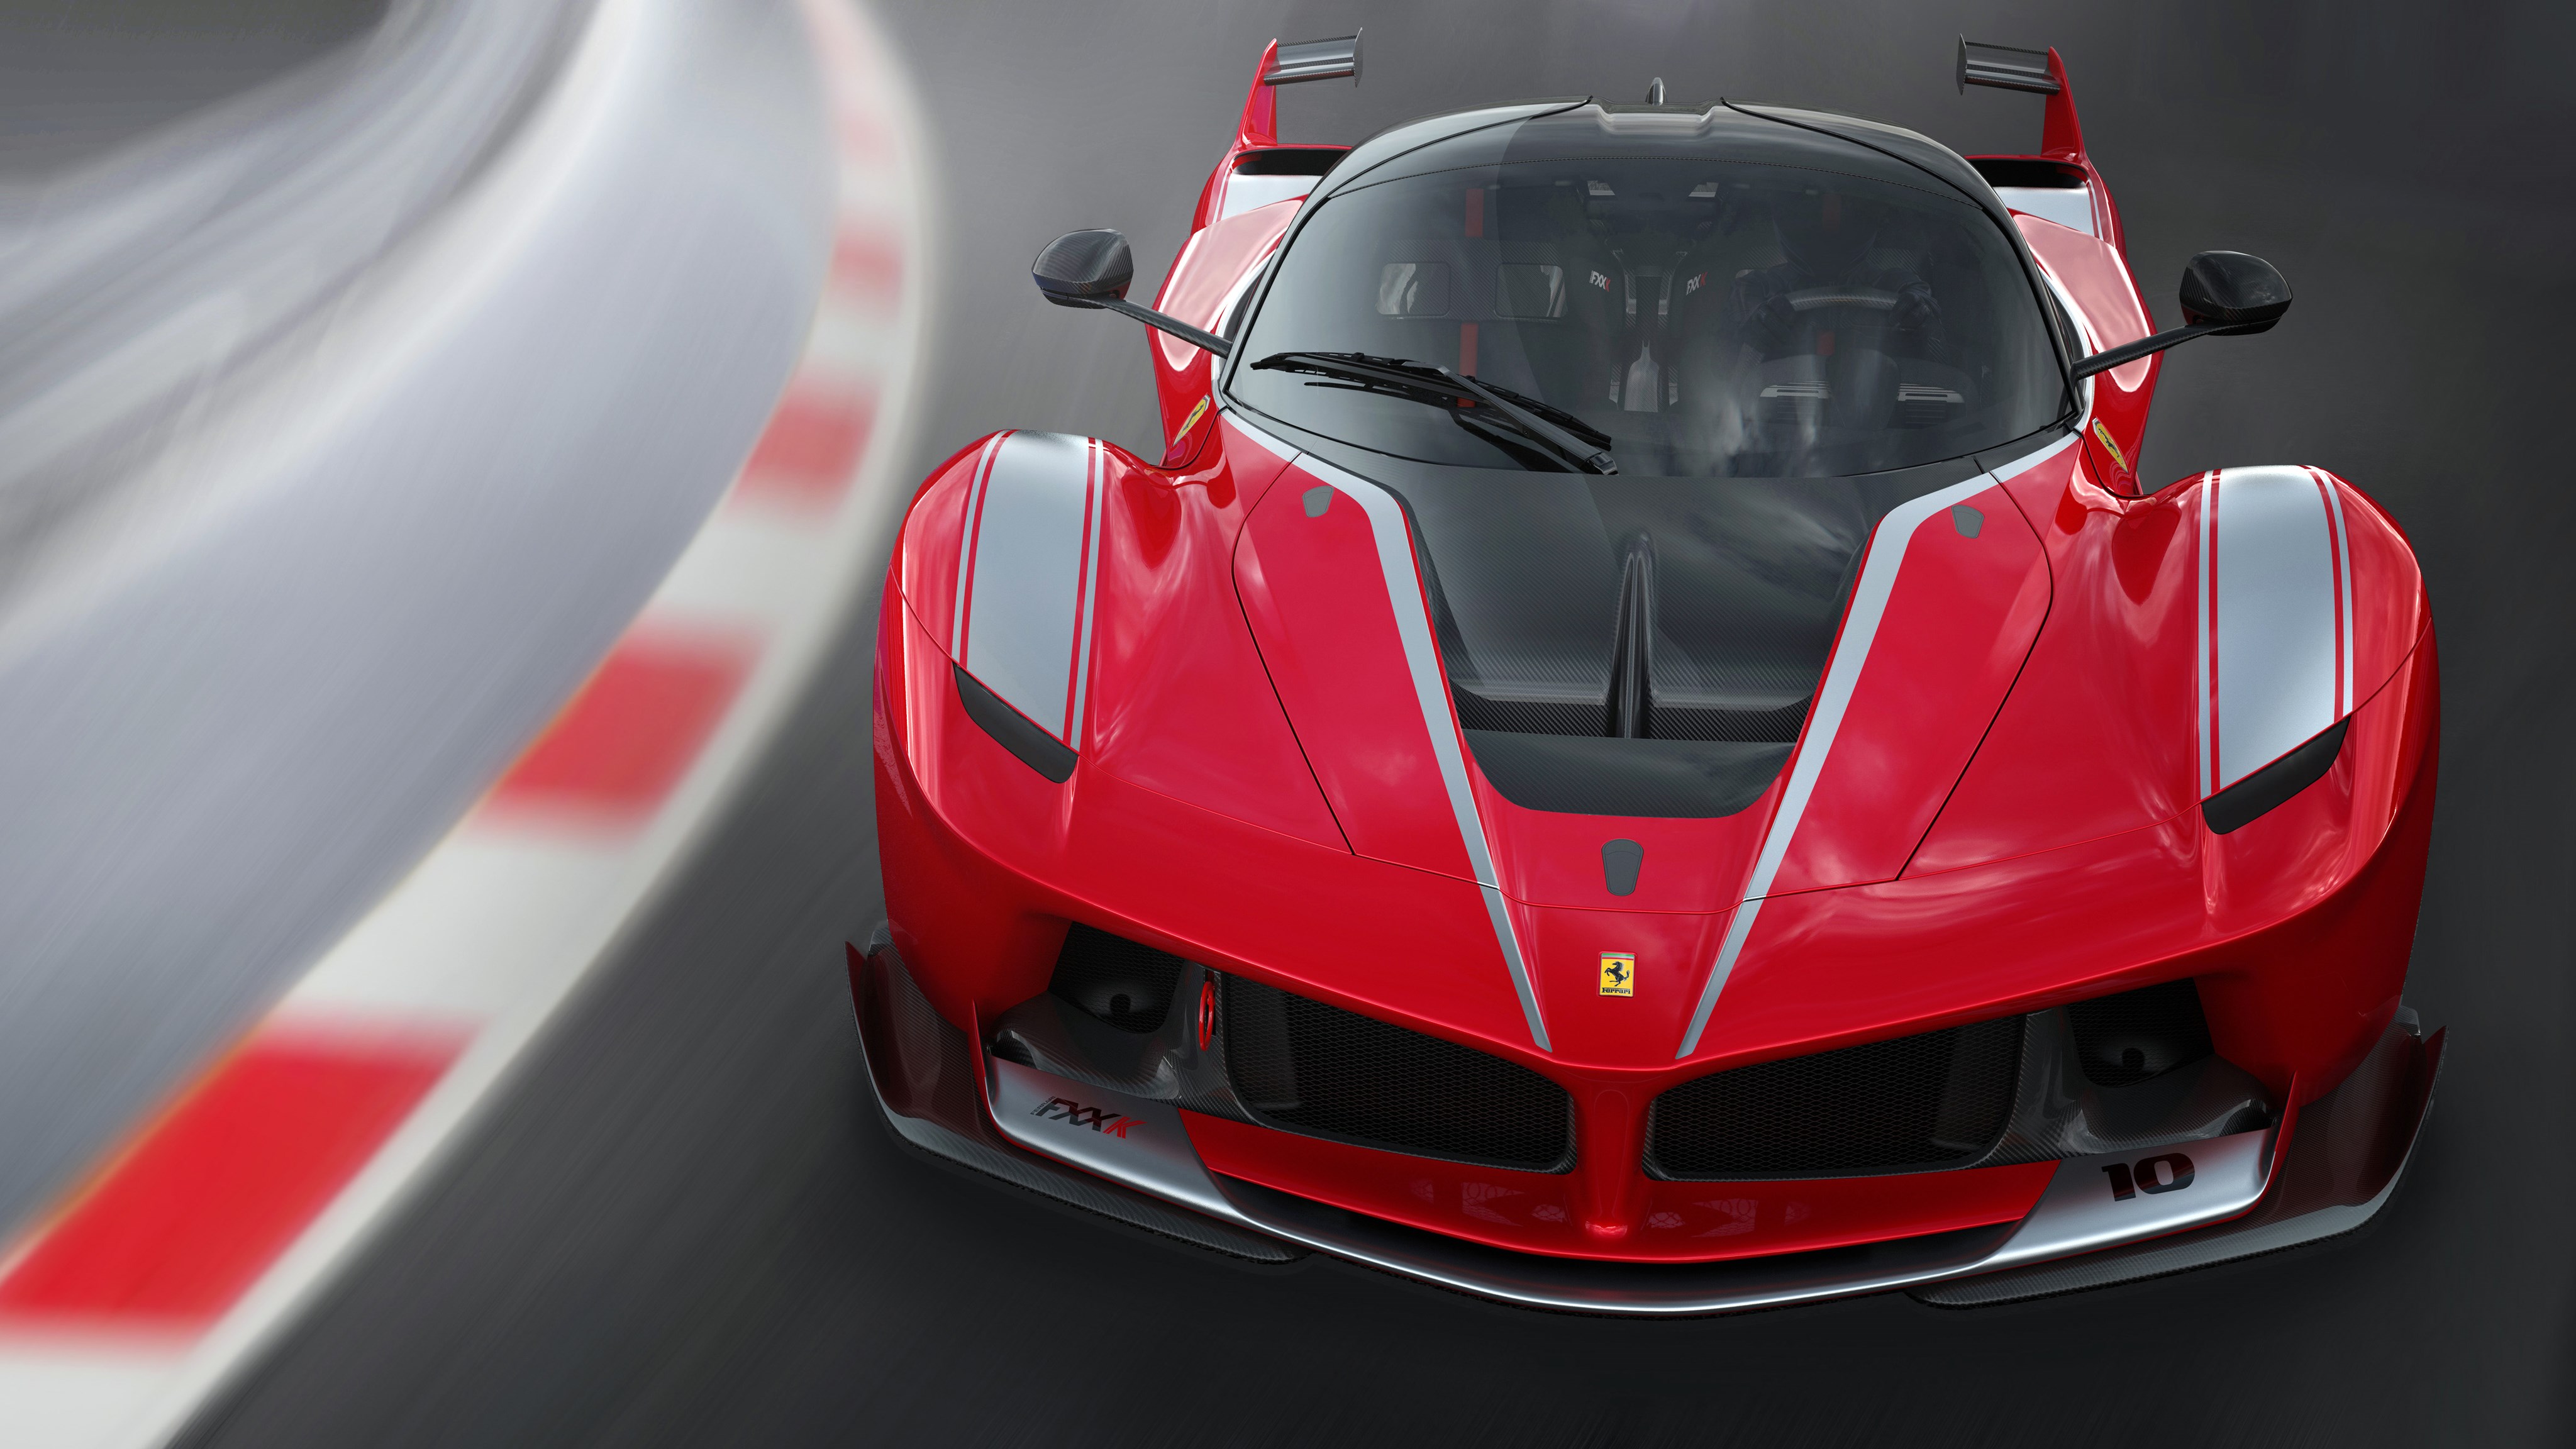 Free photo Picture of a ferrari fxx k in motion